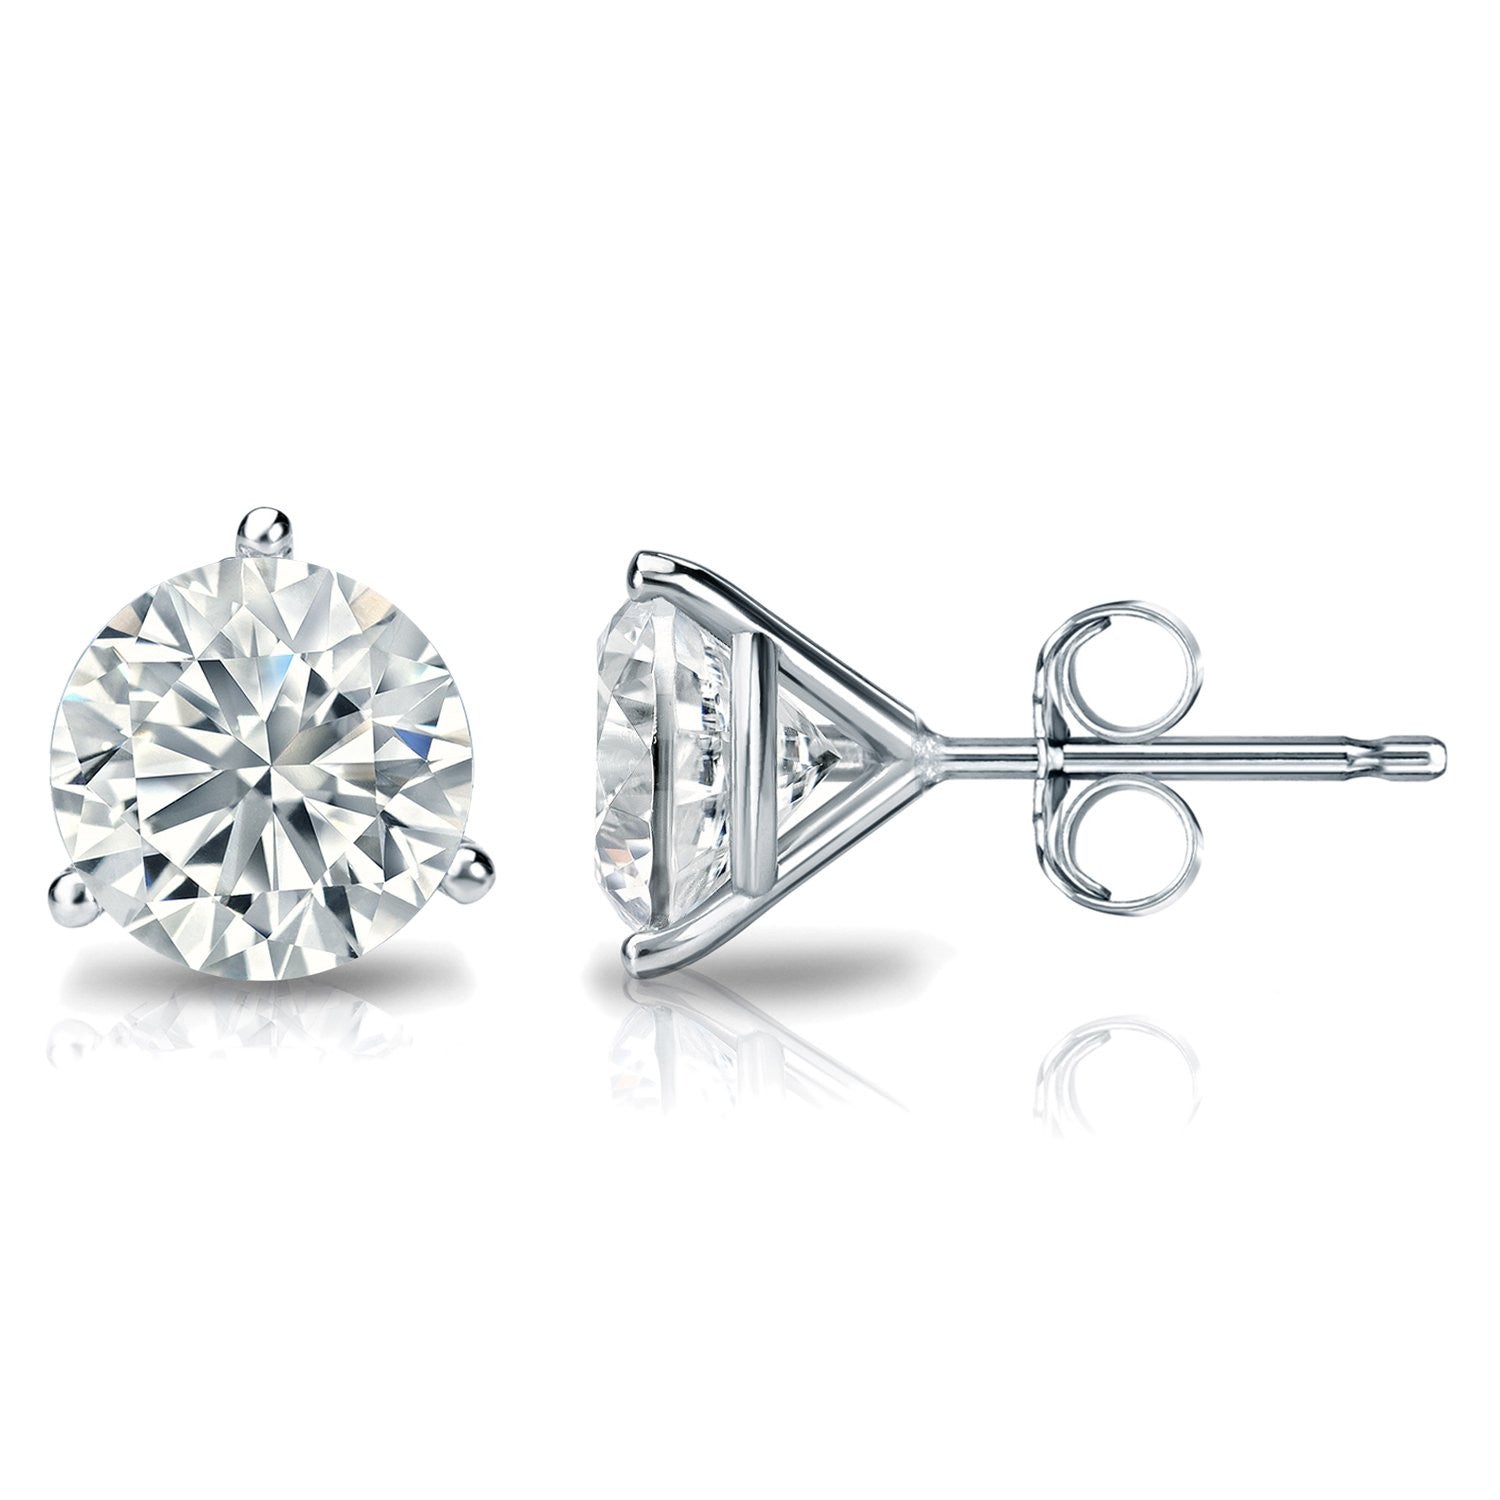 1 ¼ Carat Round 14K White Gold 3 Prong Martini Set Diamond Solitaire Stud Earrings (Signature Quality)